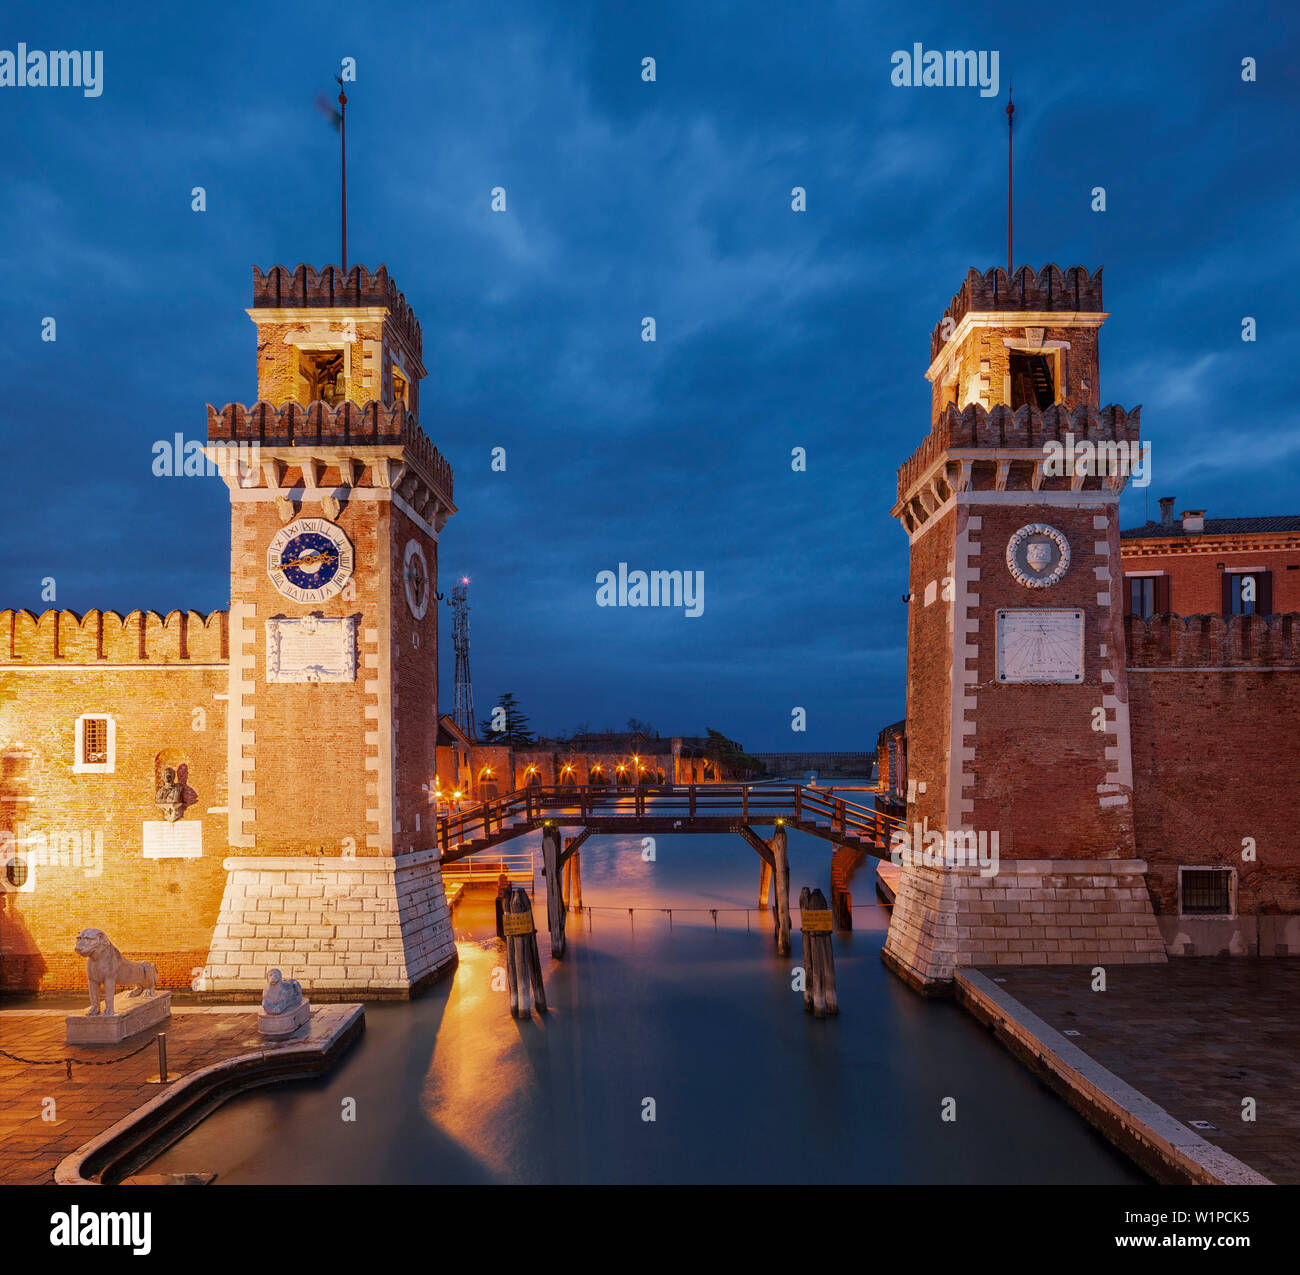 Arsenale di Venezia, the former shipyard and naval base in the blue of the night, with an illuminated wall Ingresso All'Acqua, Venetian Arsenal, Caste Stock Photo